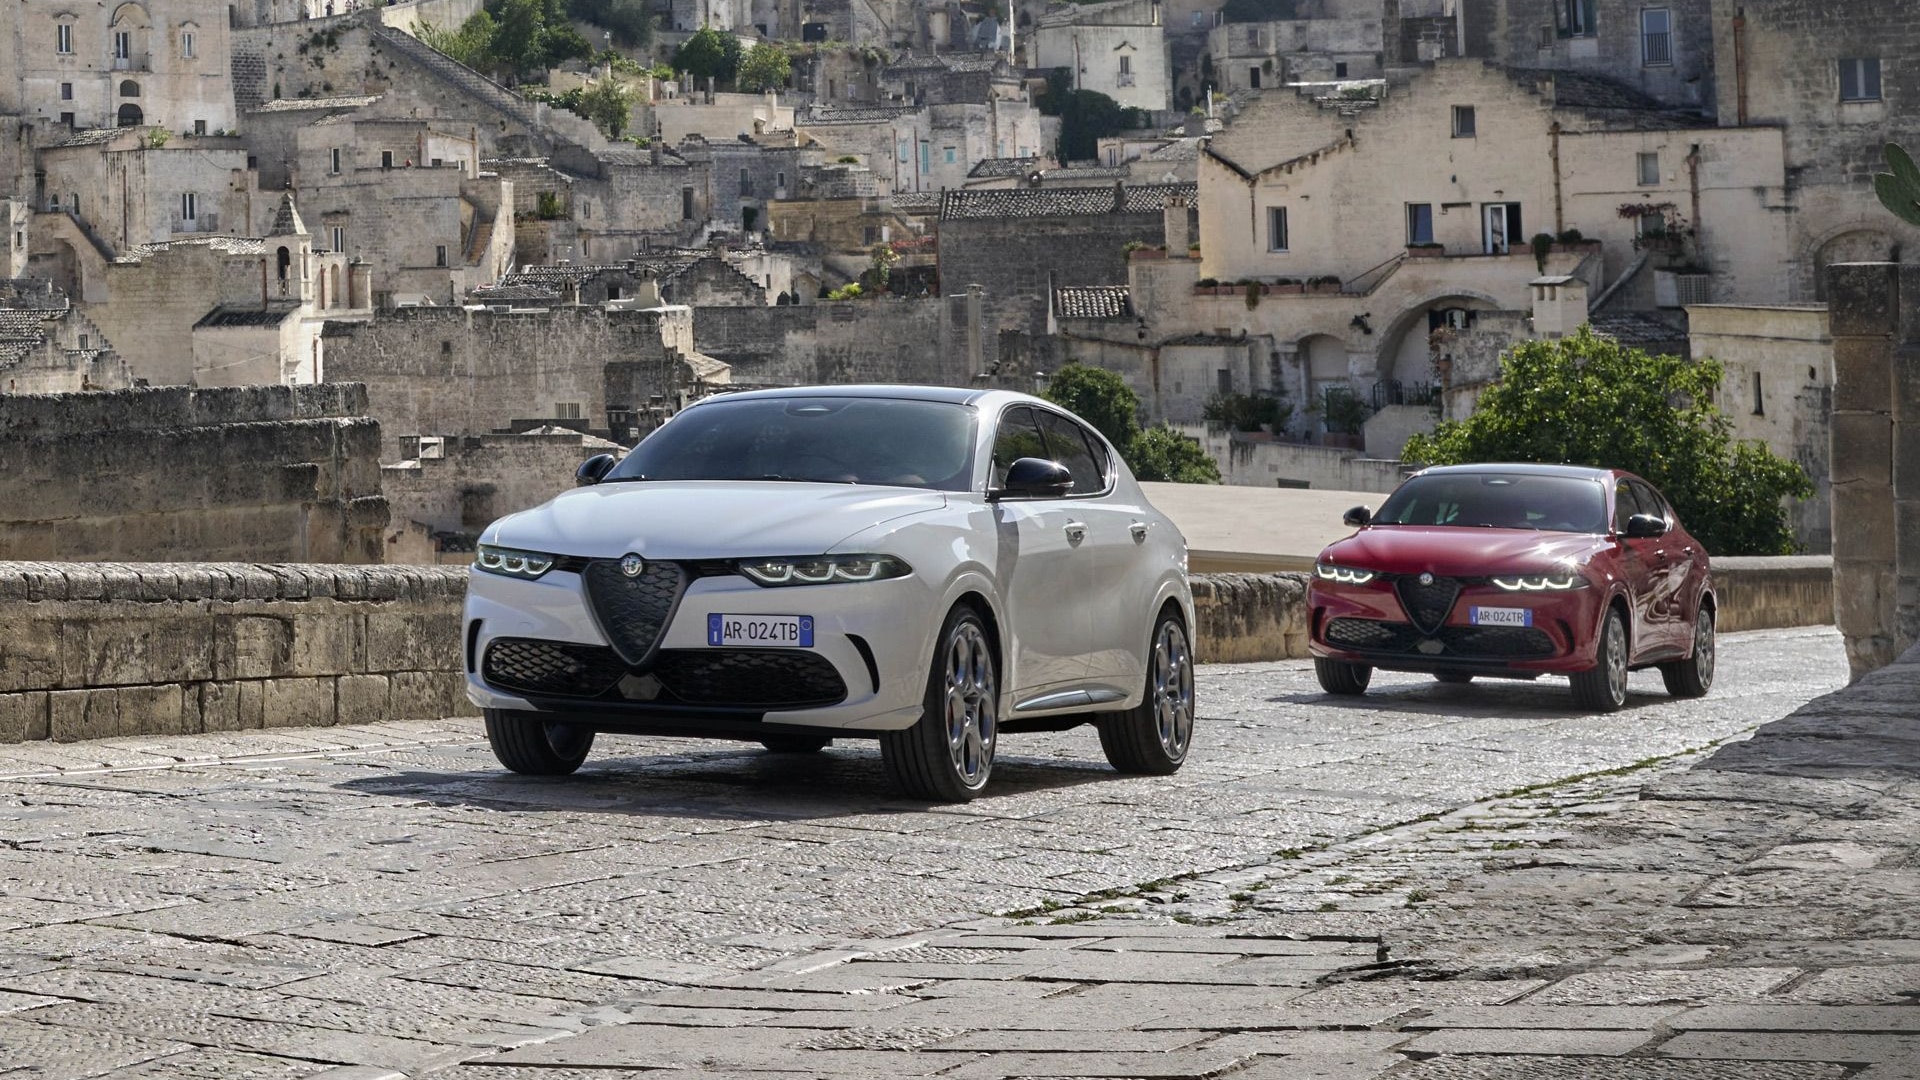 Tributo Italiano is Alfa Romeo's first global special series